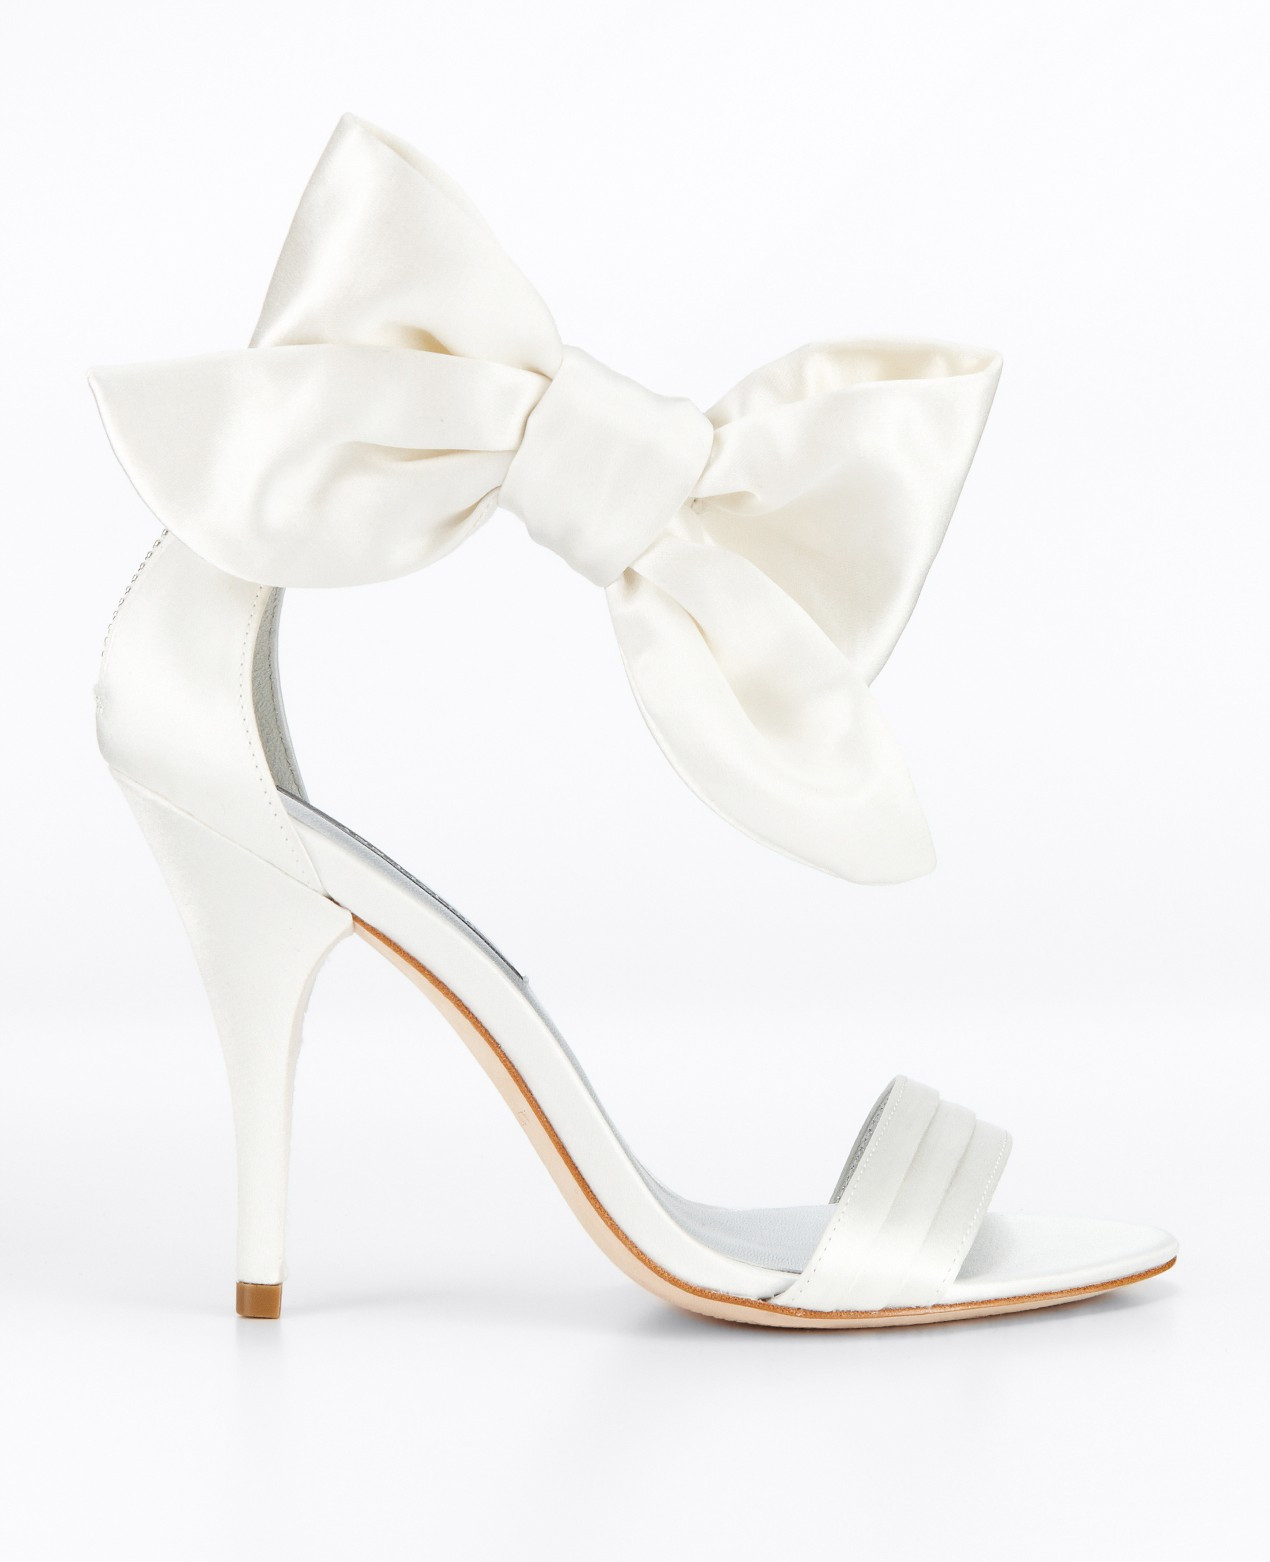 Wedding Shoes With Bows
 Shoeniverse Summer Wedding Style with KATE SPADE White